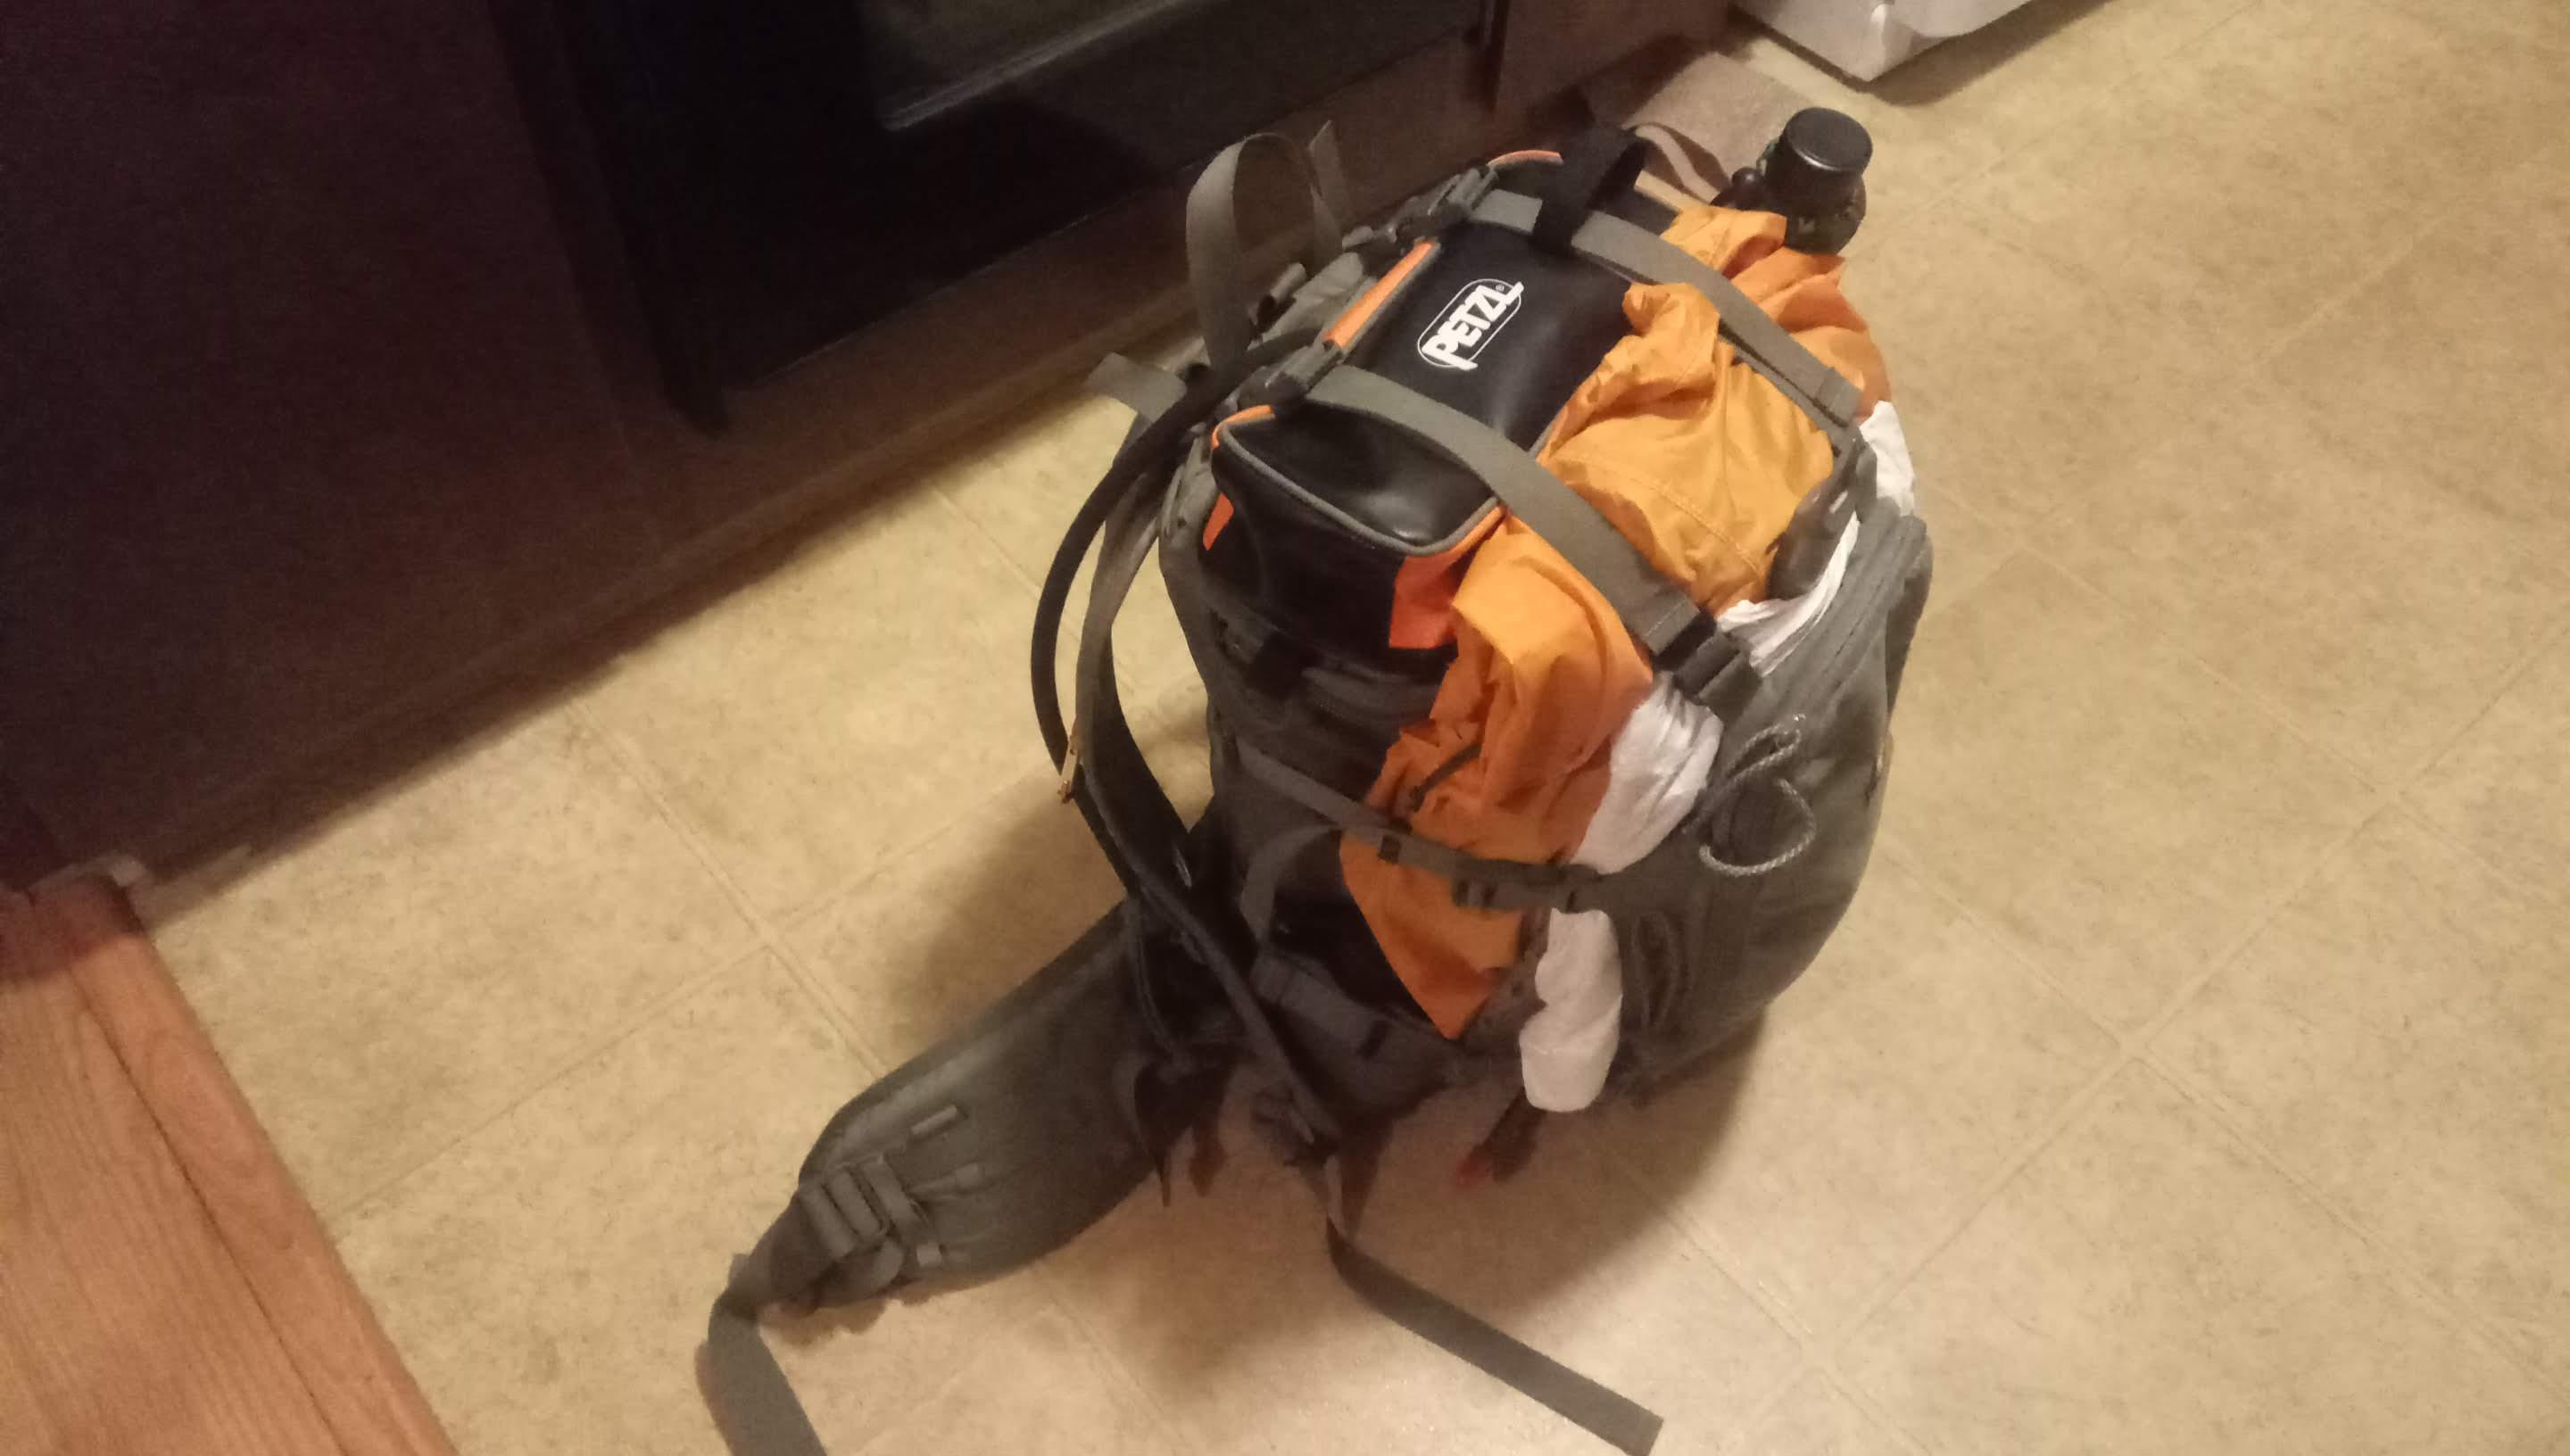 Tried-and-true Umlindi pack from Hill People Gear